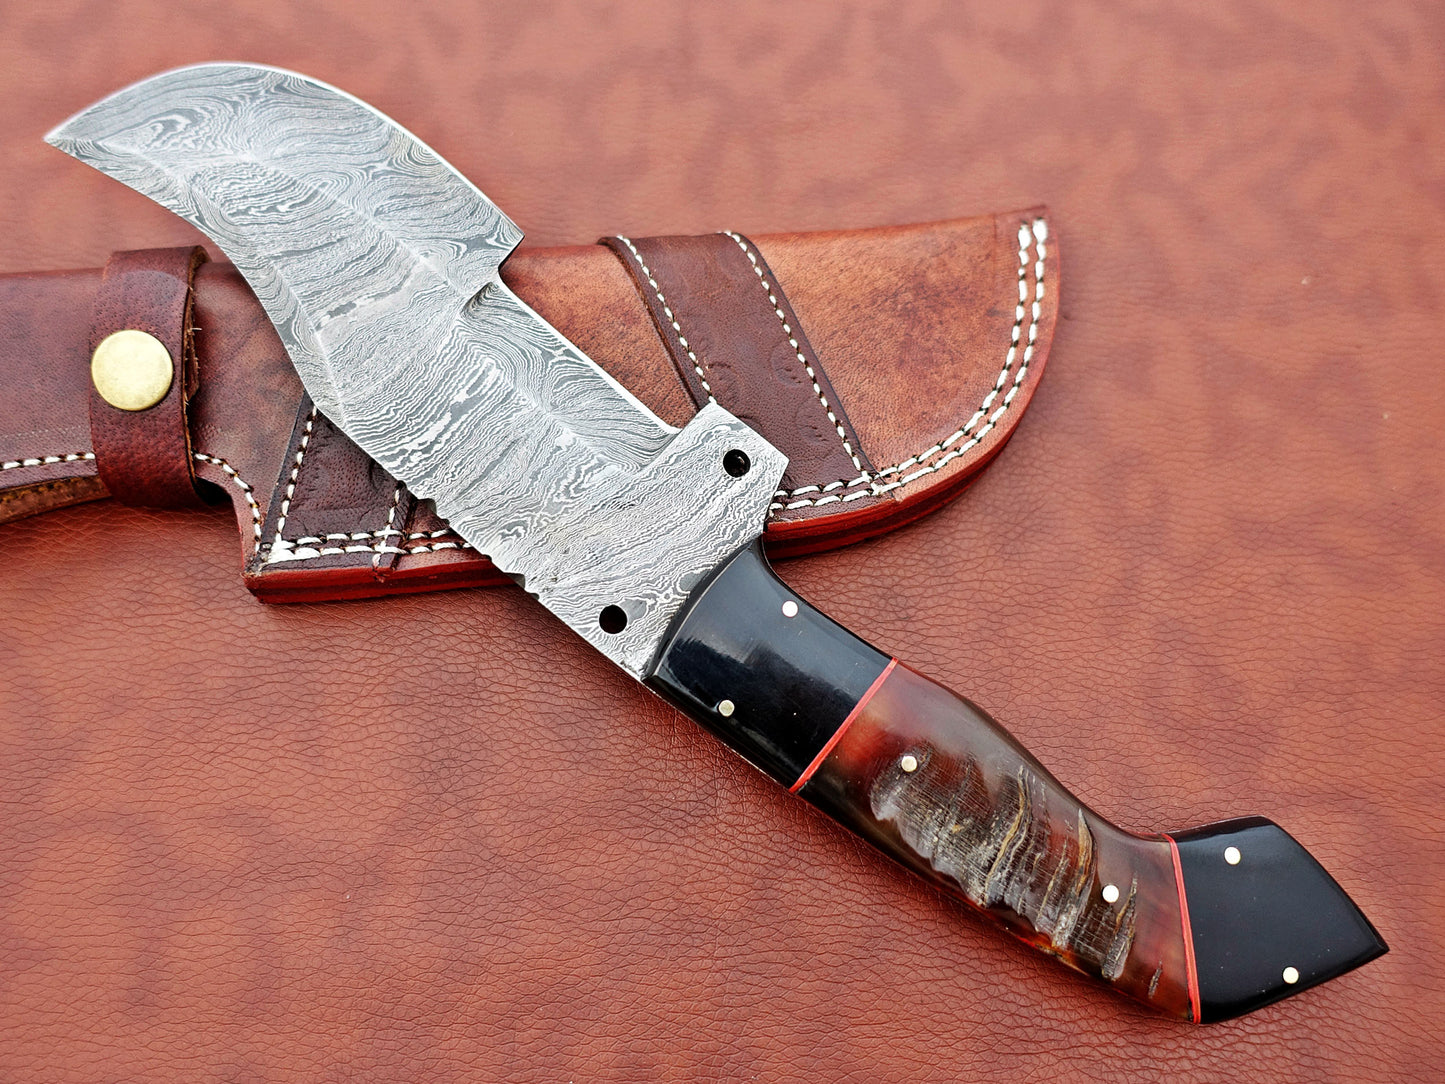 12" Long hand forged twist pattern full tang Damascus steel tracker knife, Ram horn scale with Damascus Bolster & pomel, Cow leather sheath